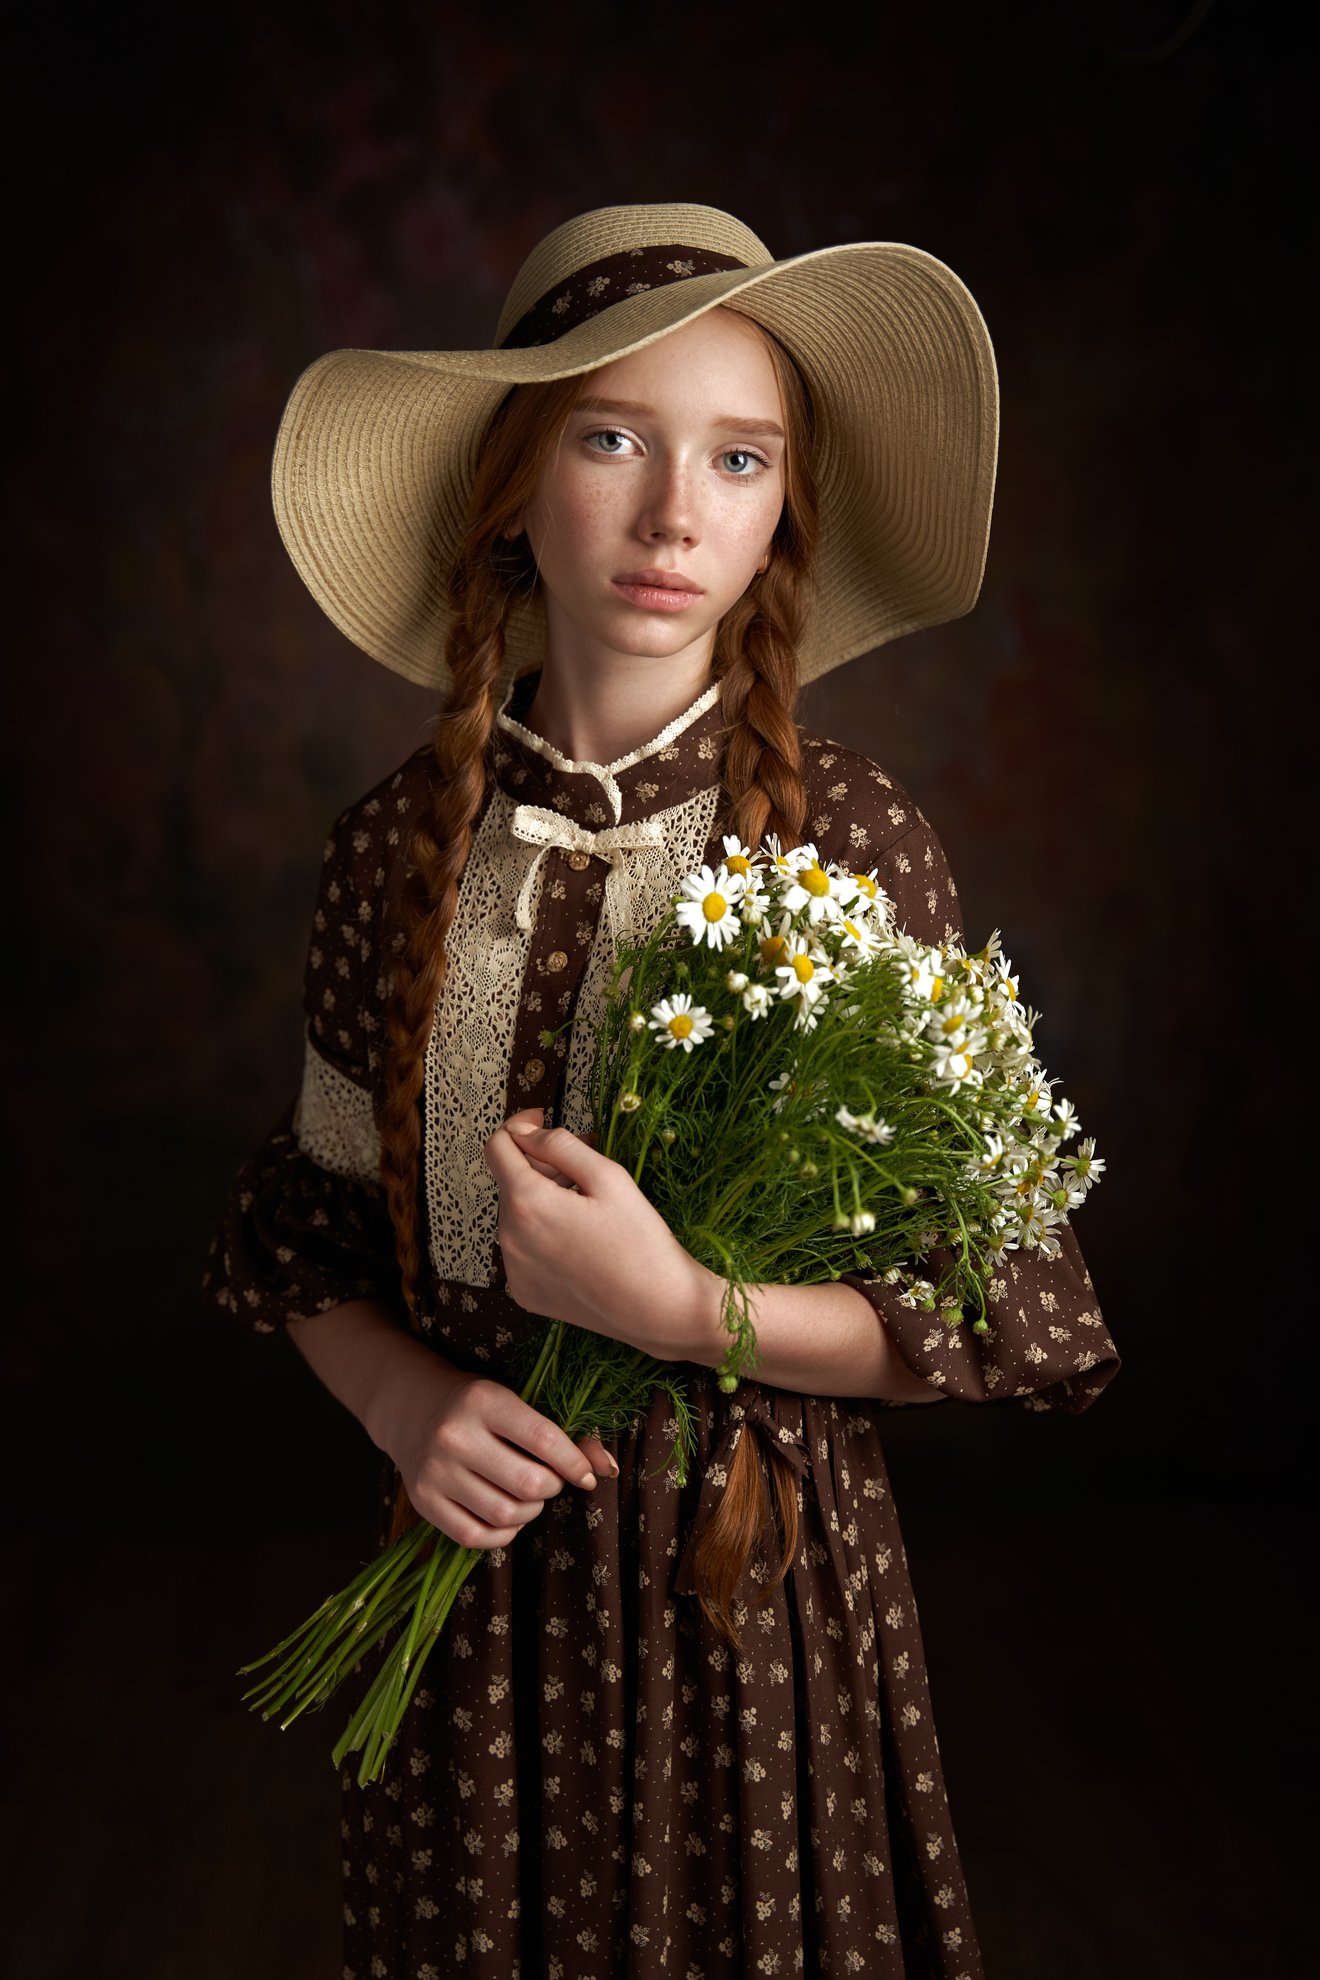 Girl with daisies-Seed Nft